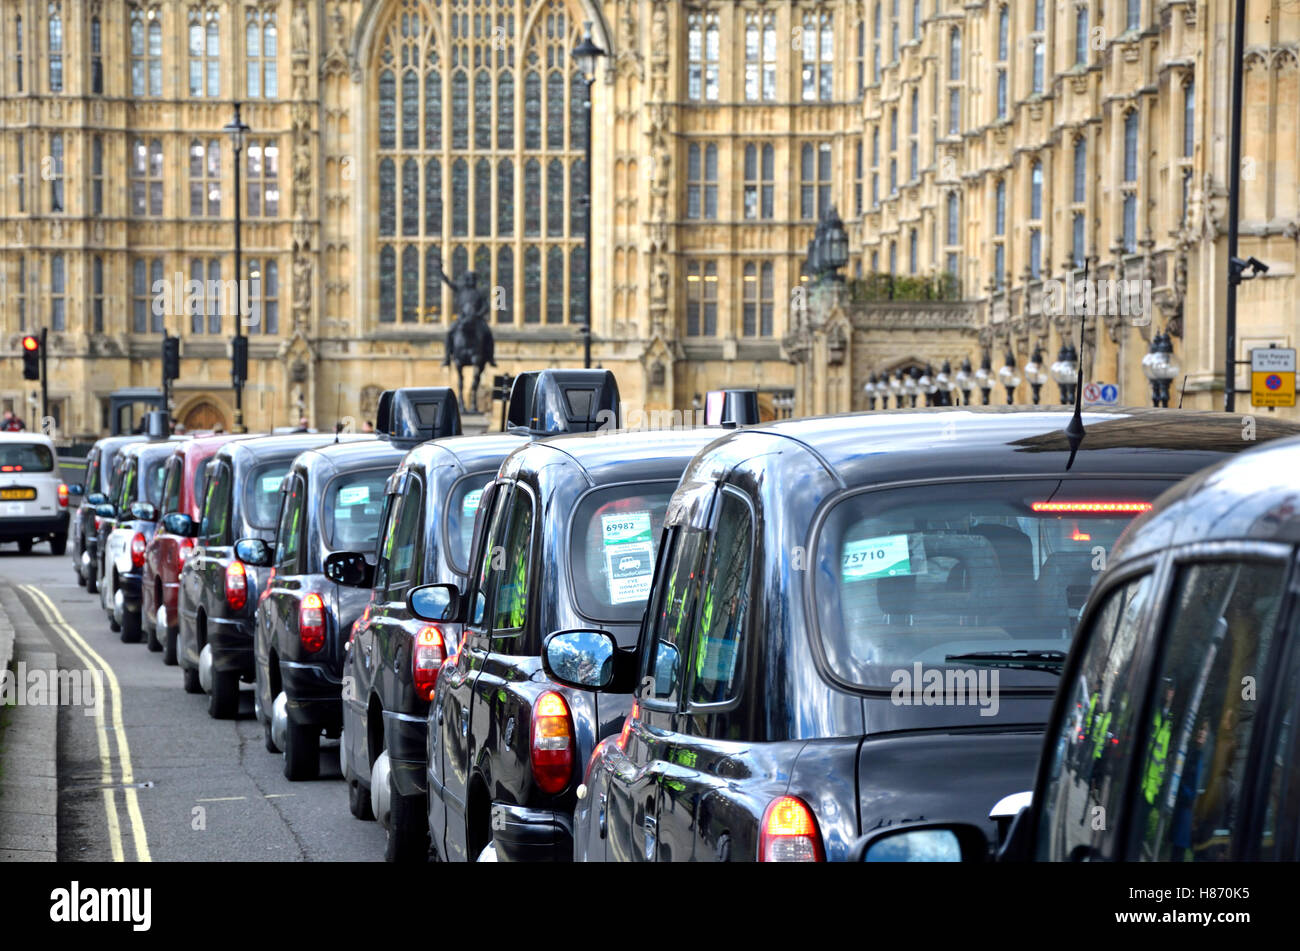 London, England, UK. A long queue of taxis outside Parliament during a protest against Uber, Feb 2016 Stock Photo